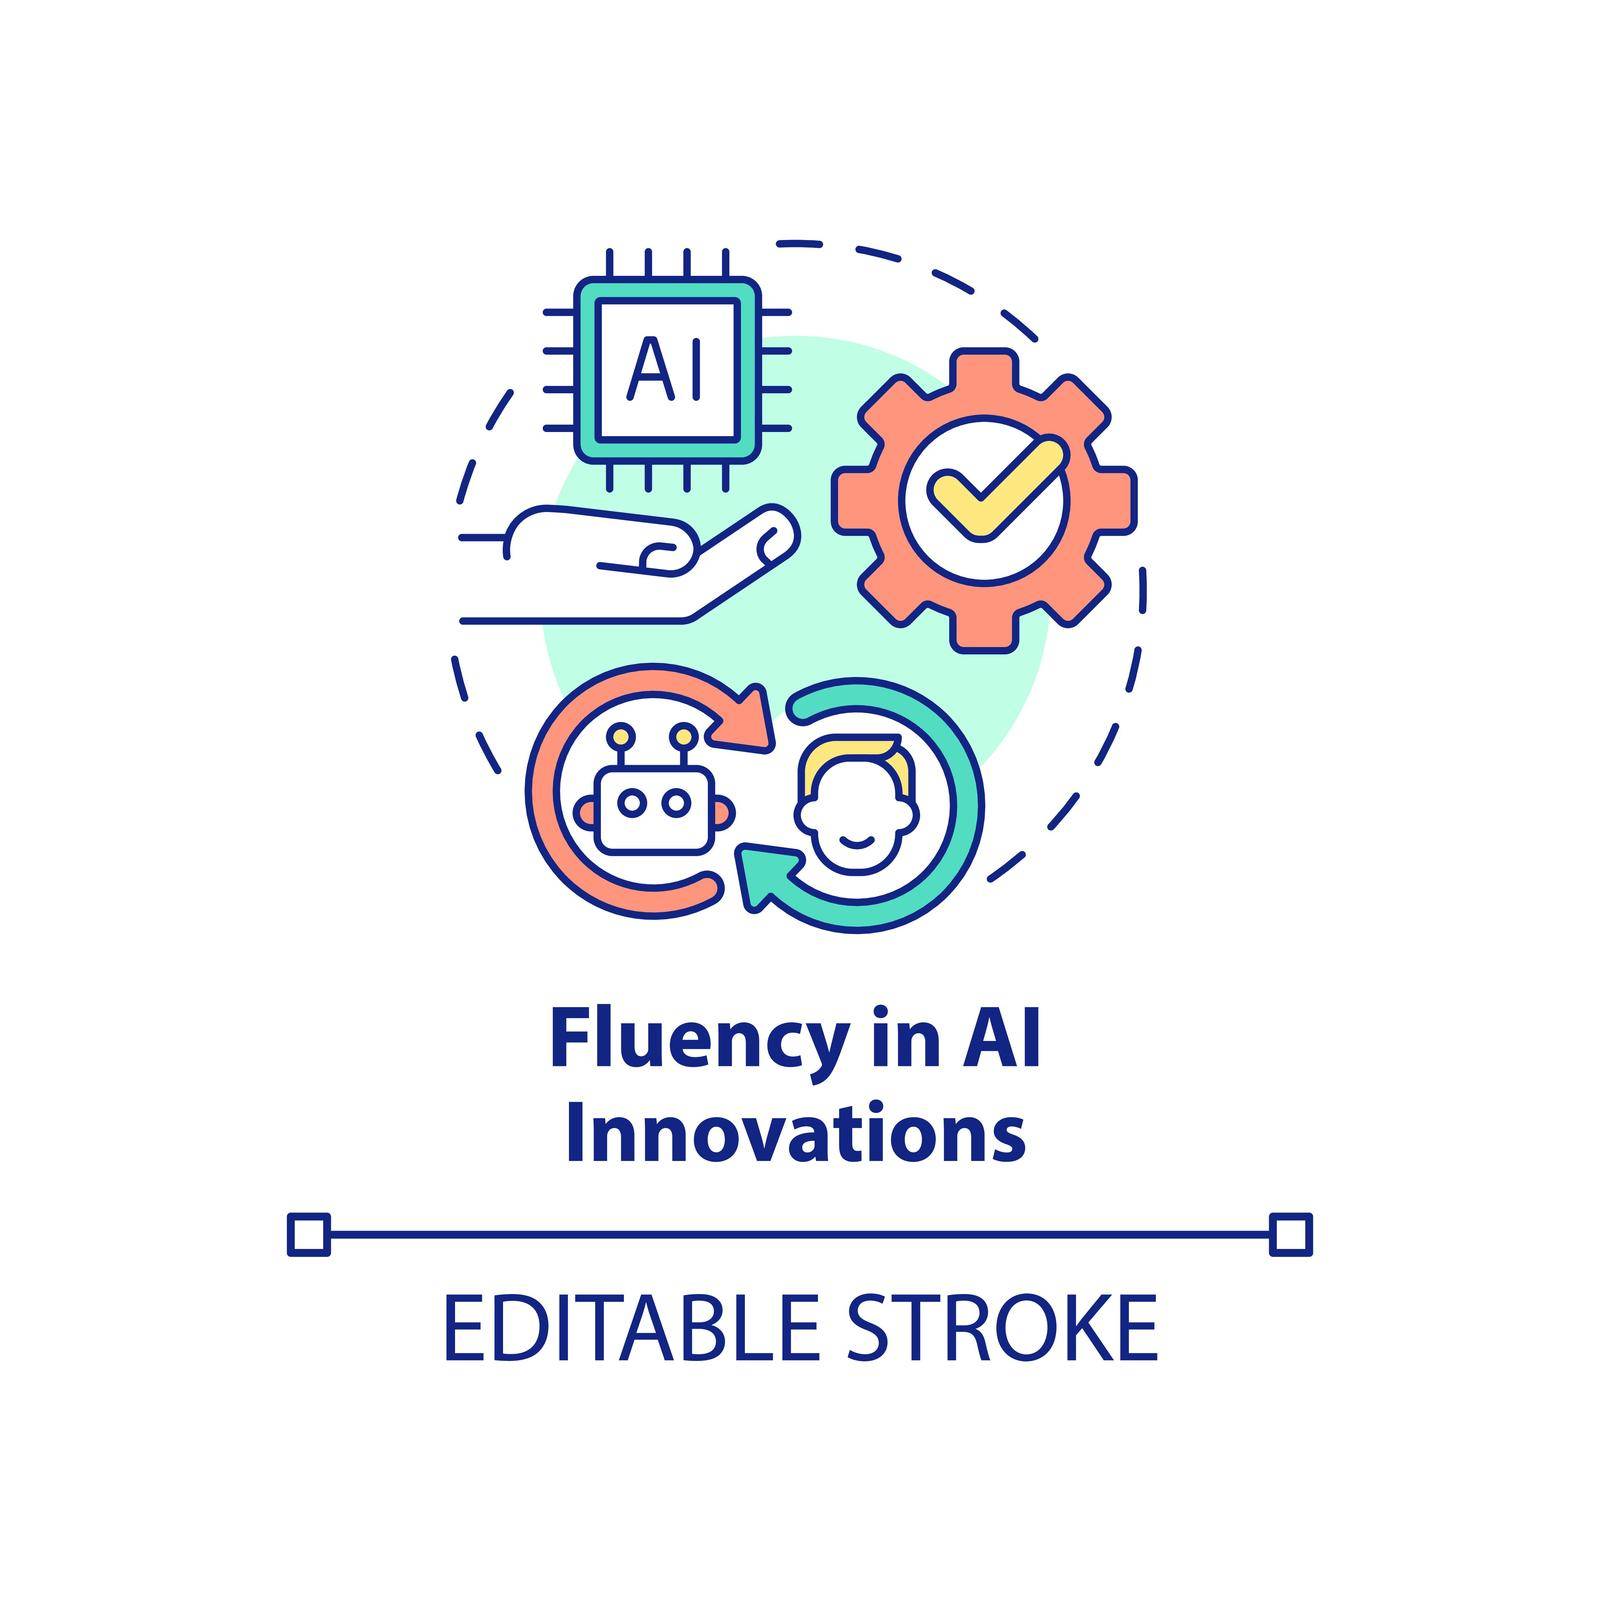 Fluency in AI innovations concept icon by bsd